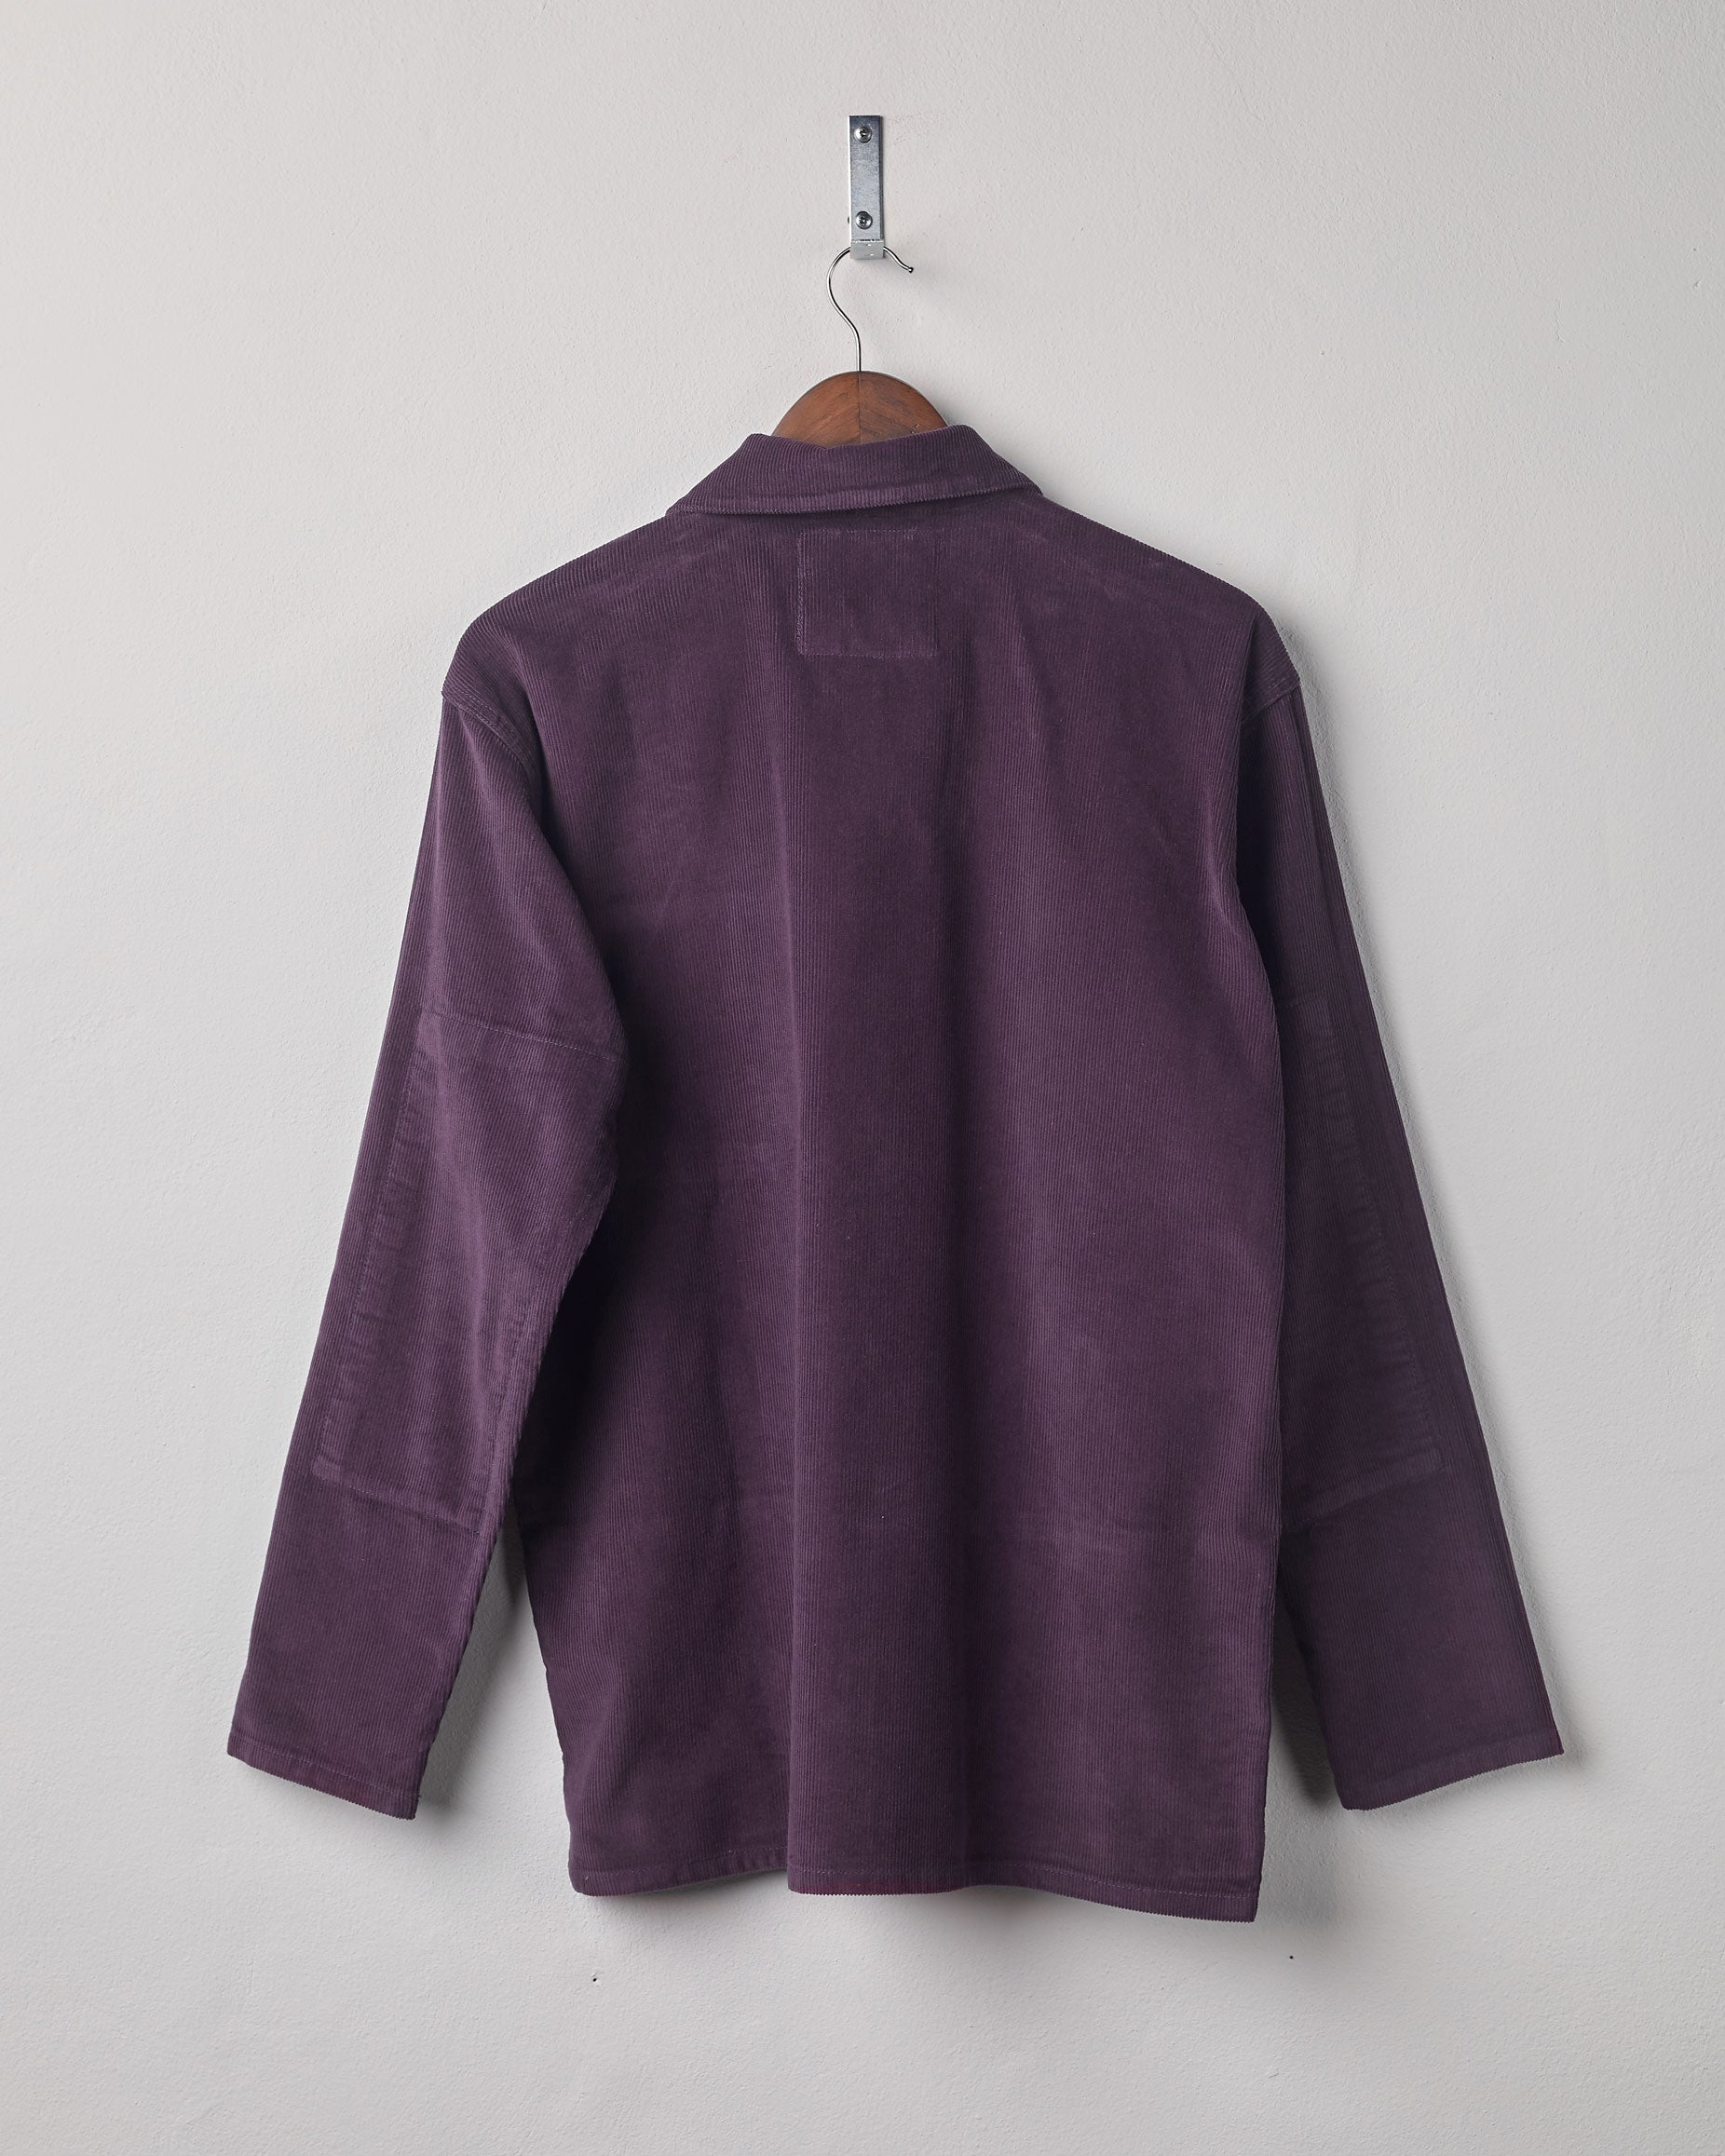 Full-length rear view of #3001, plum-coloured corduroy over shirt with reinforced elbows.